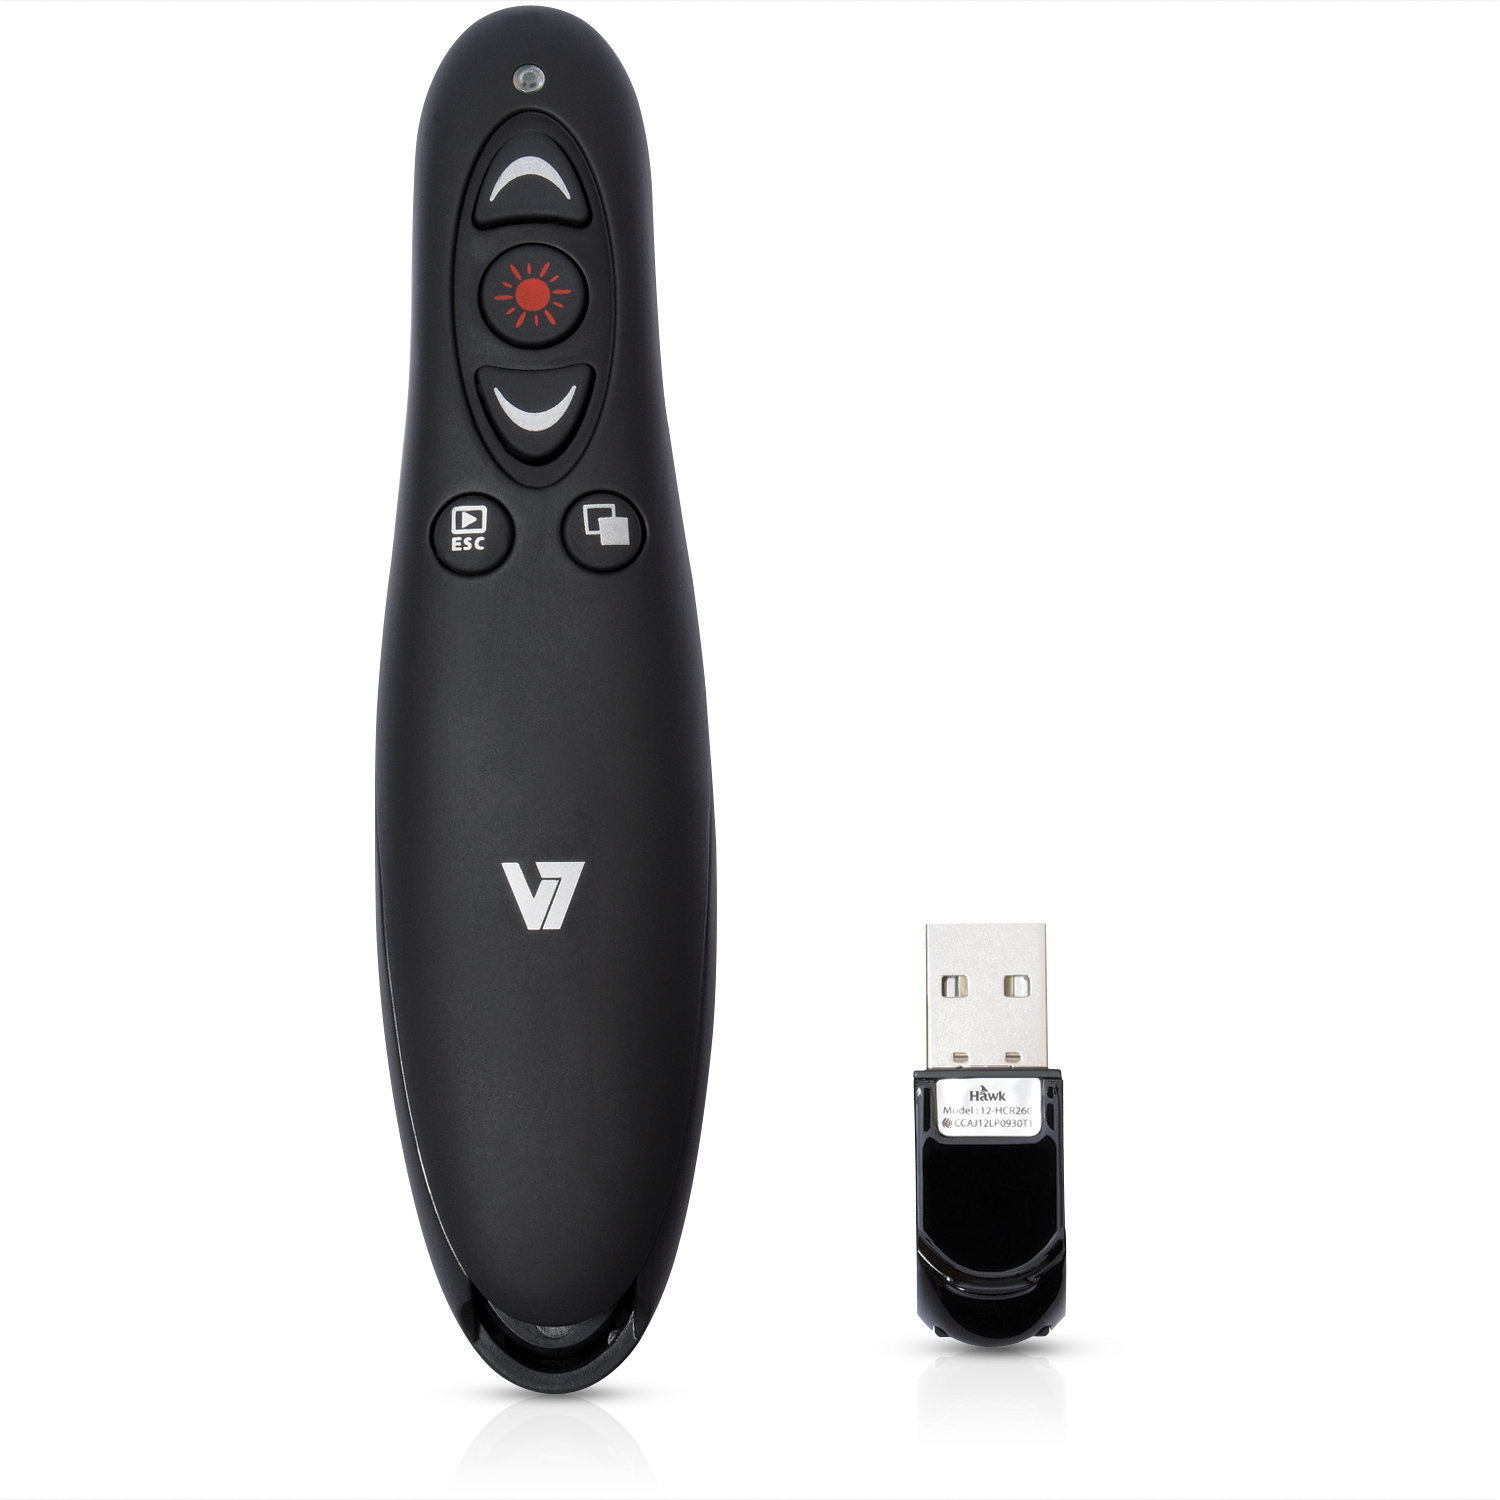 V7 - Input Devices               V7 Wireless Presenter 2.4ghz        Incl Usb Dongle Wth Card Reader     Wp1000-24g-19eb